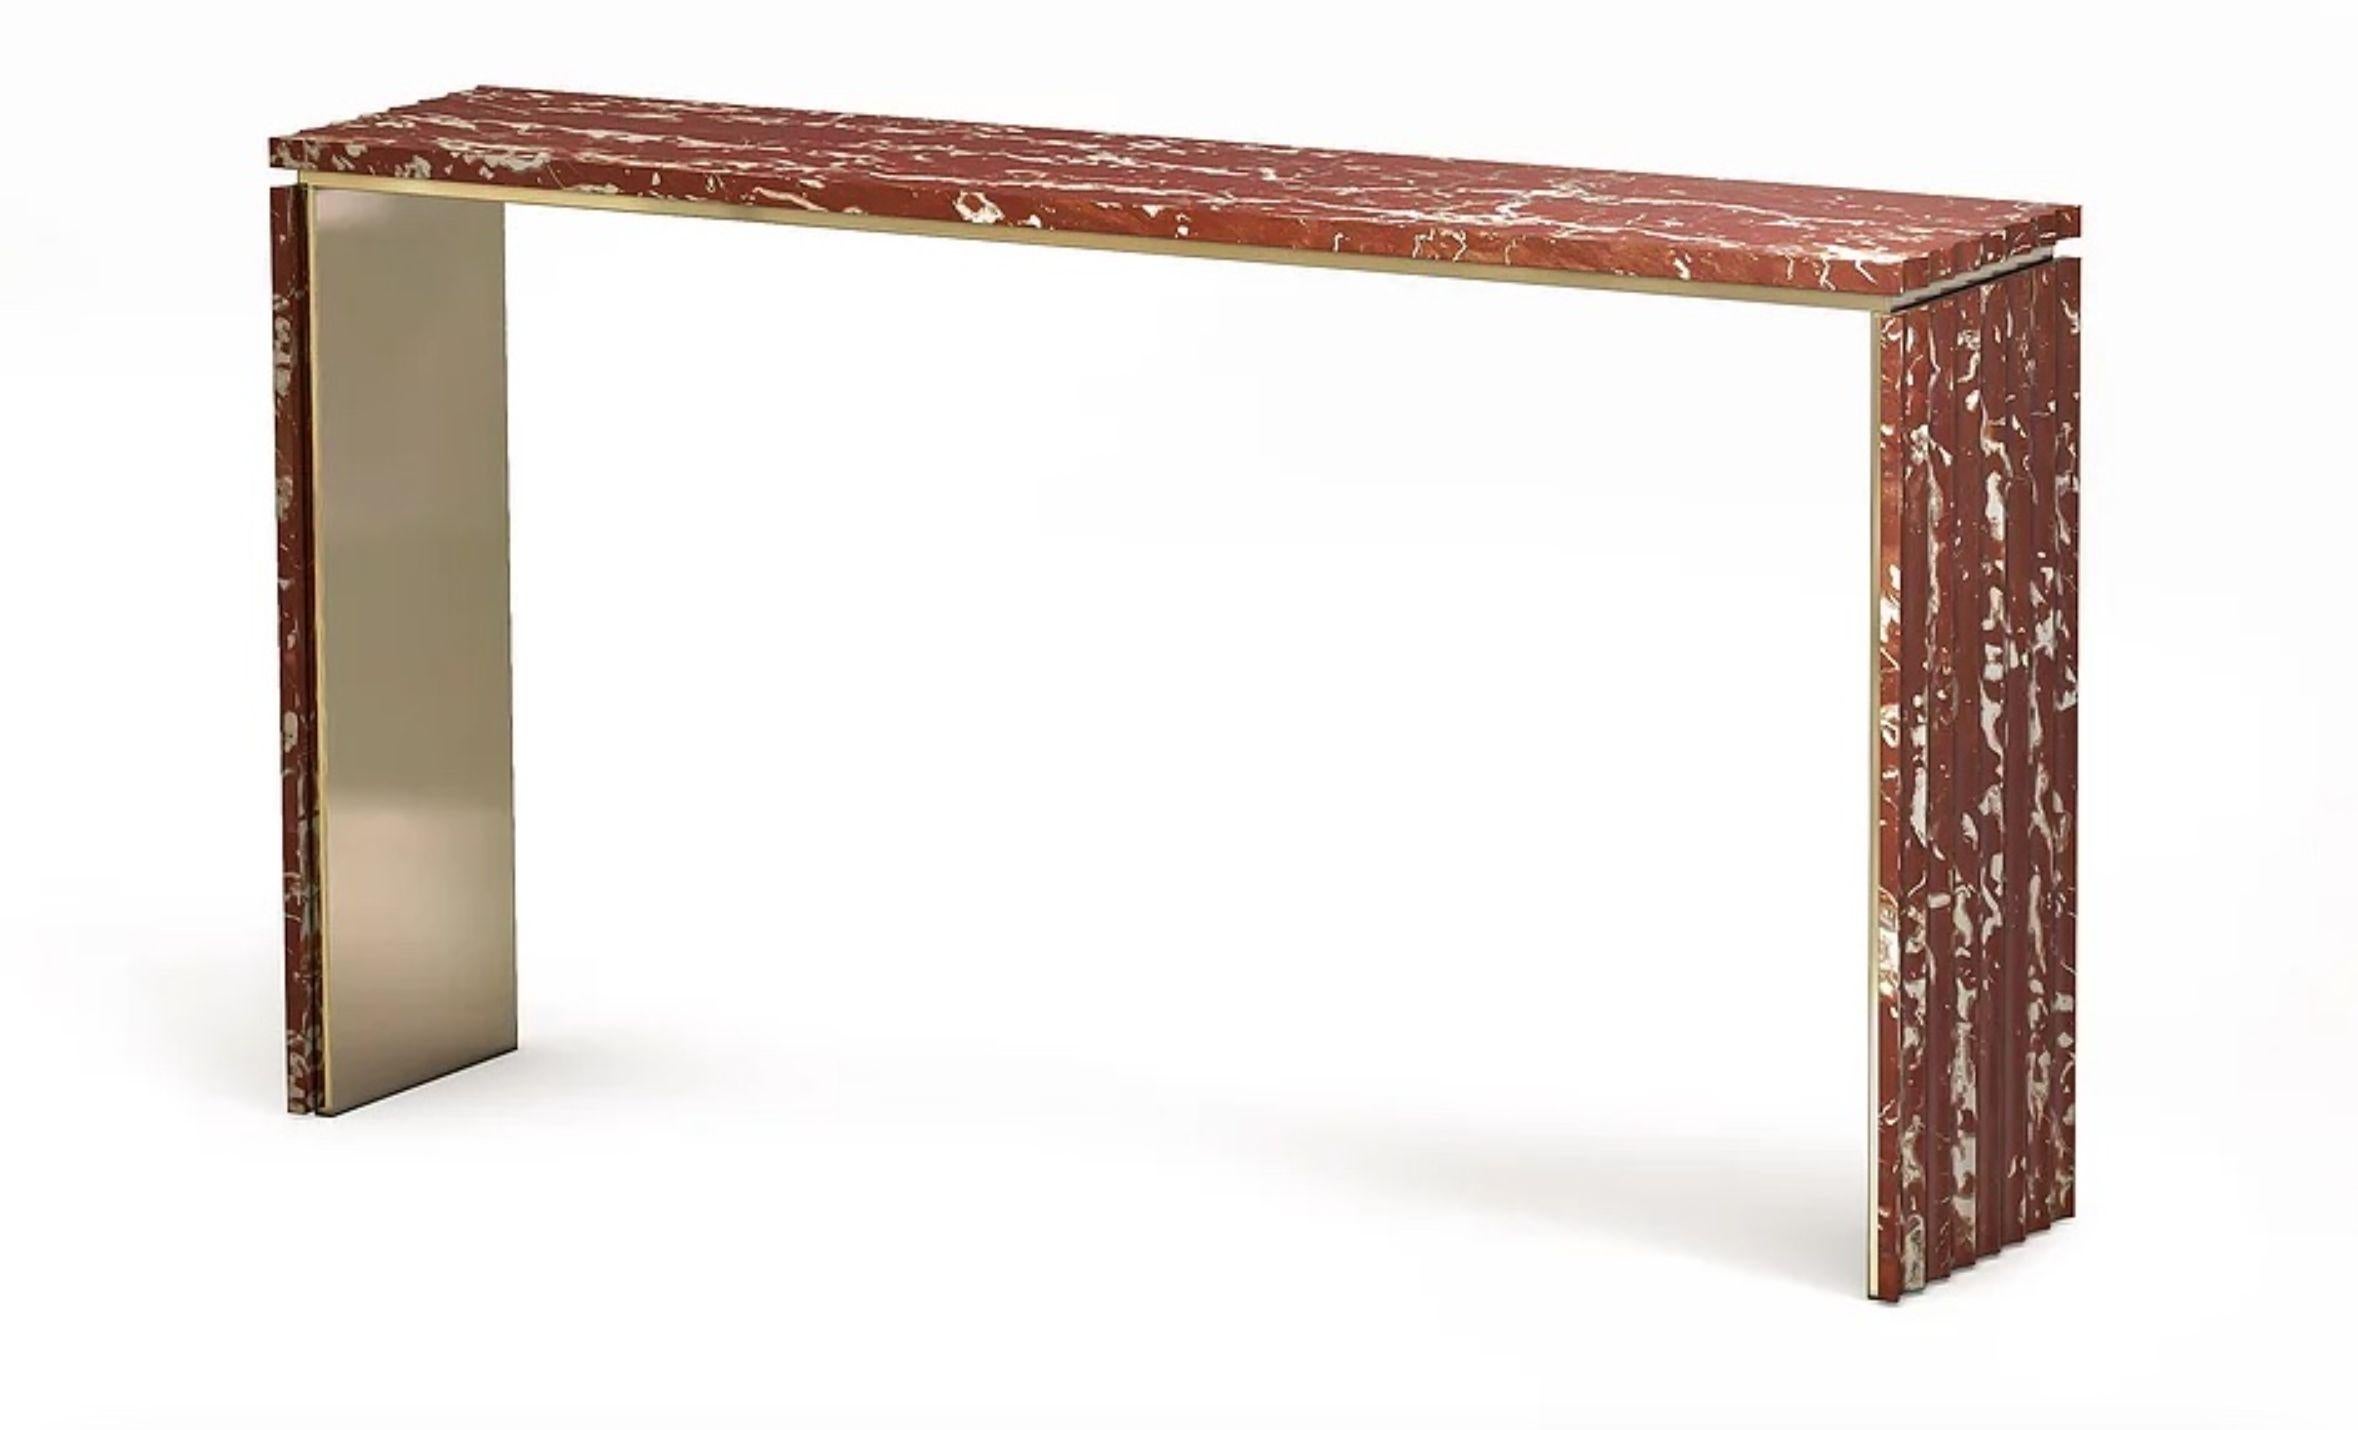 Curves marble console by Marmi Serafini
Materials: Marble and brass
Dimensions: 180 x 40 H 90 cm

Other marbles available.

Console with soft and sophisticated lines embellished by the undulating side surfaces leaving the horizontal part